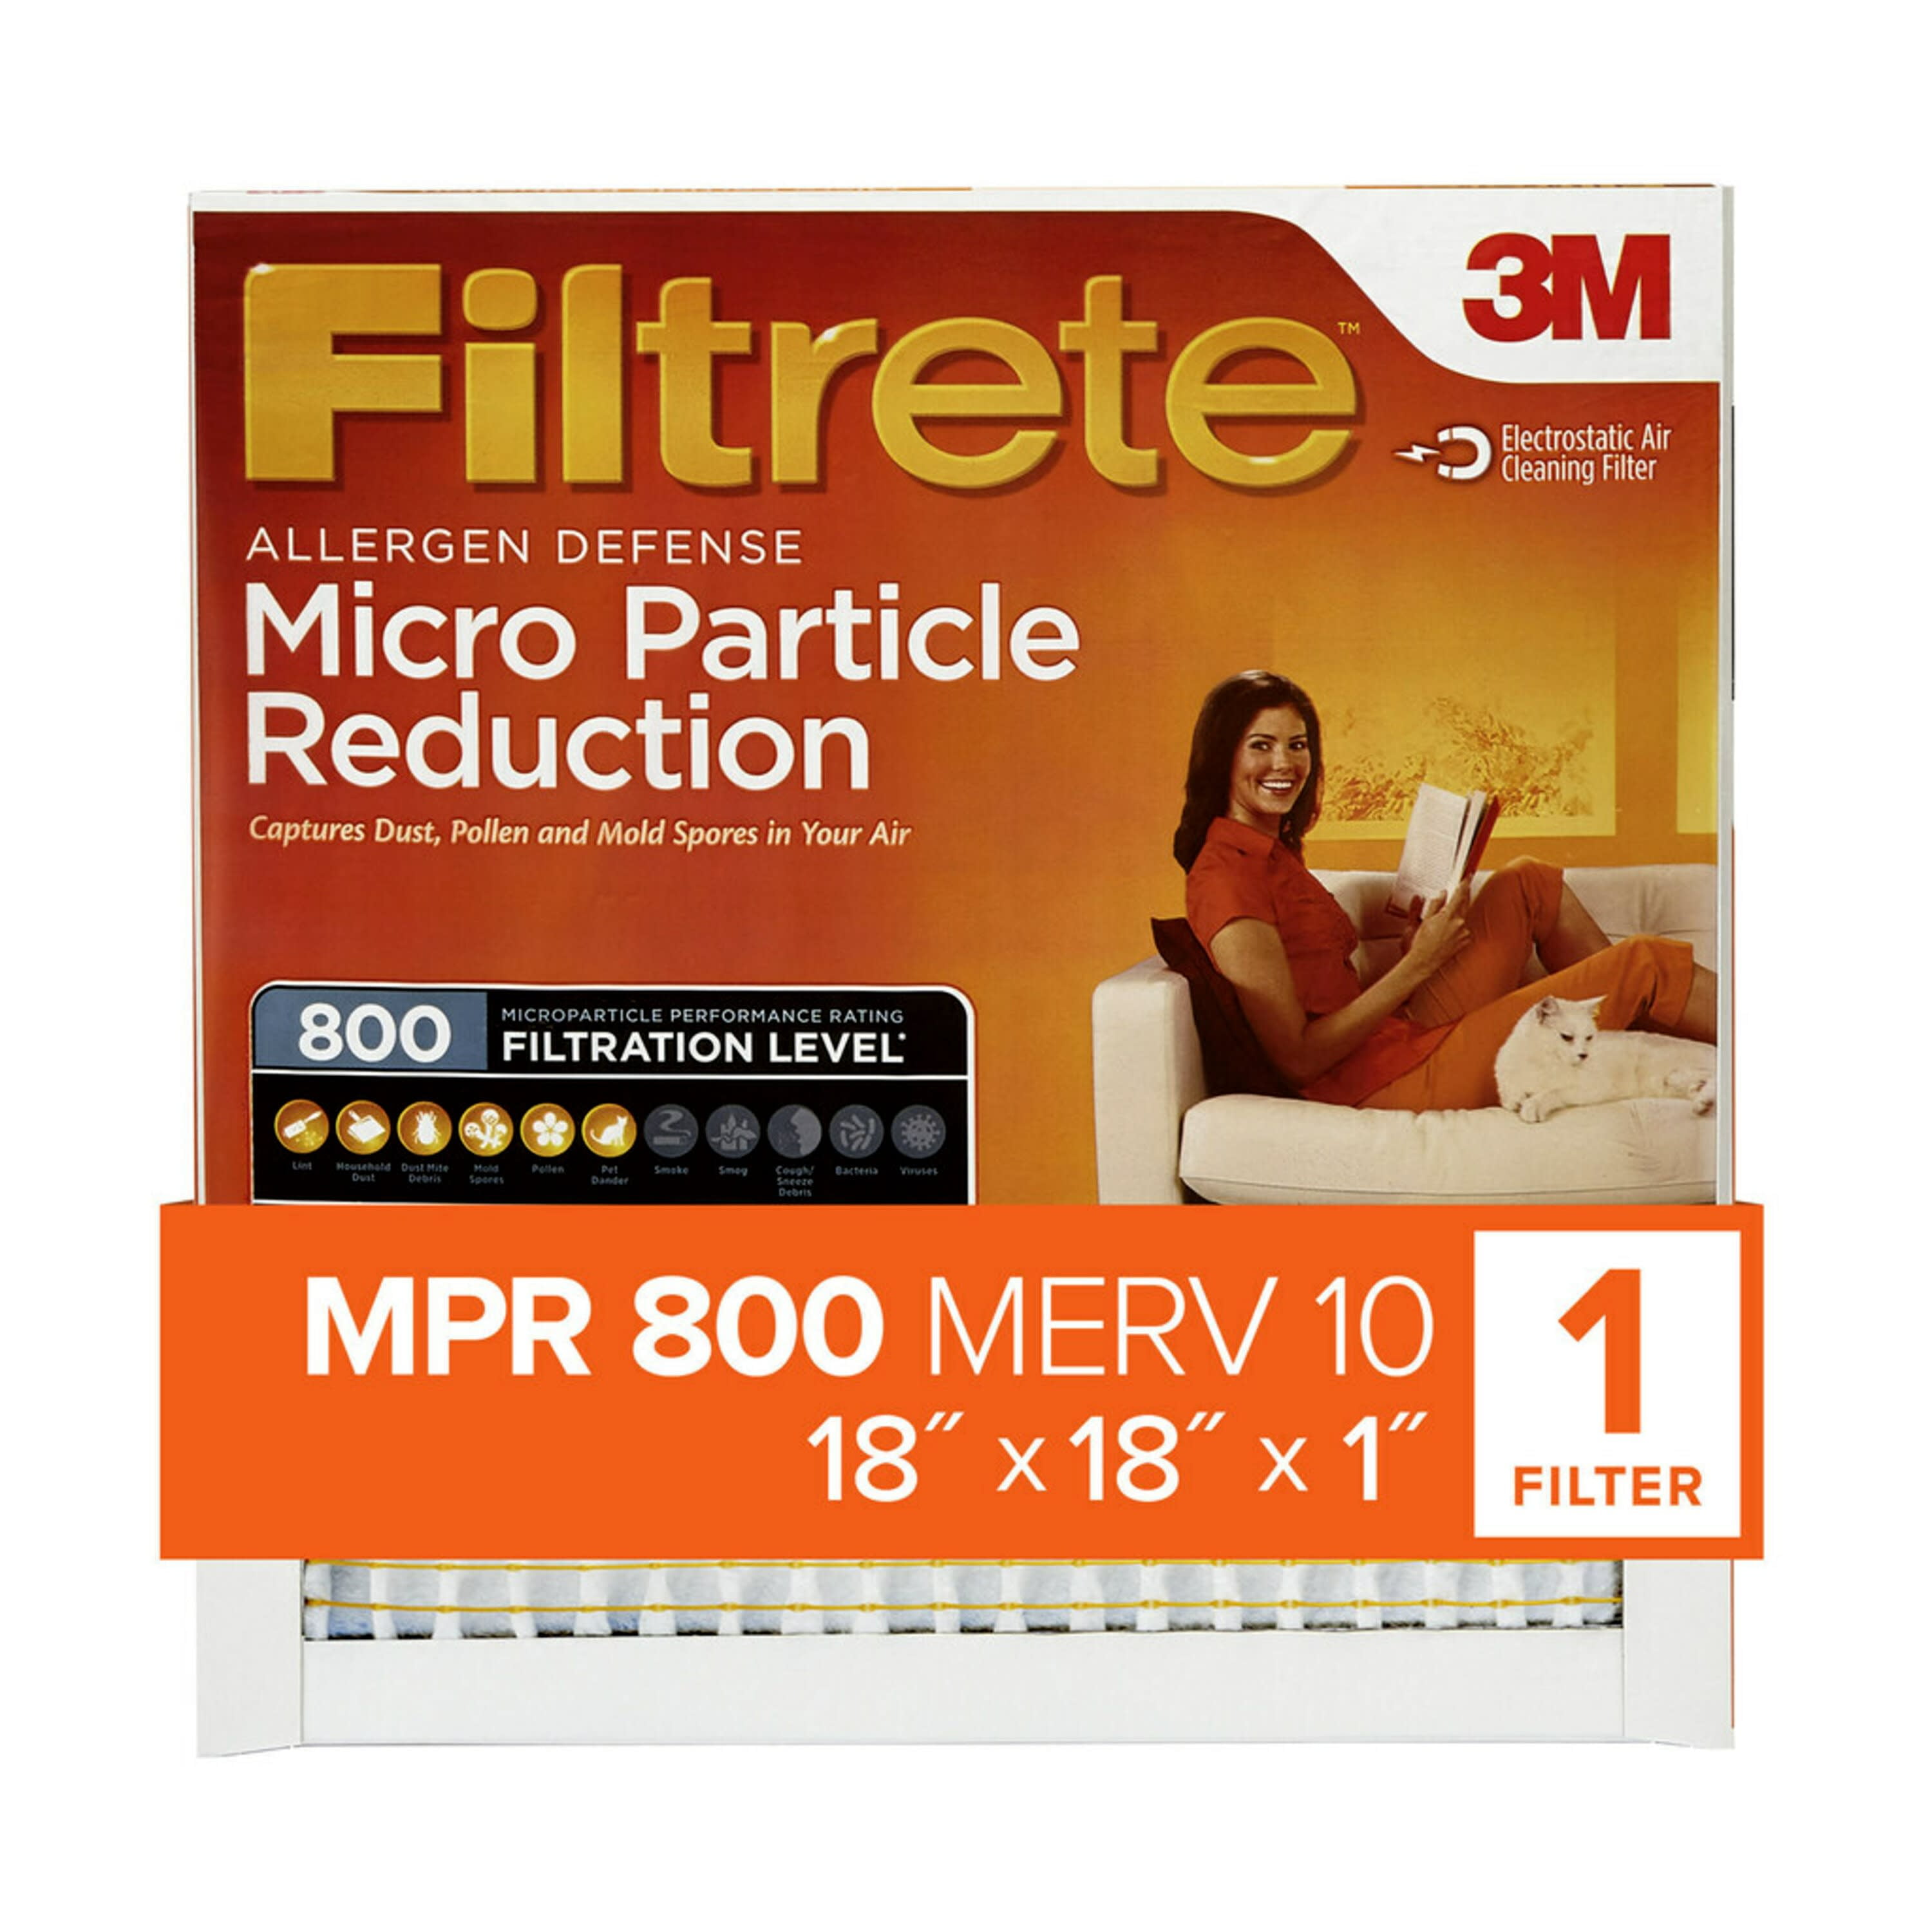 Filtrete by 3M 18x18x1, MERV 10, Micro Particle Reduction HVAC Furnace Air Filter, 800 MPR, 1 Filter